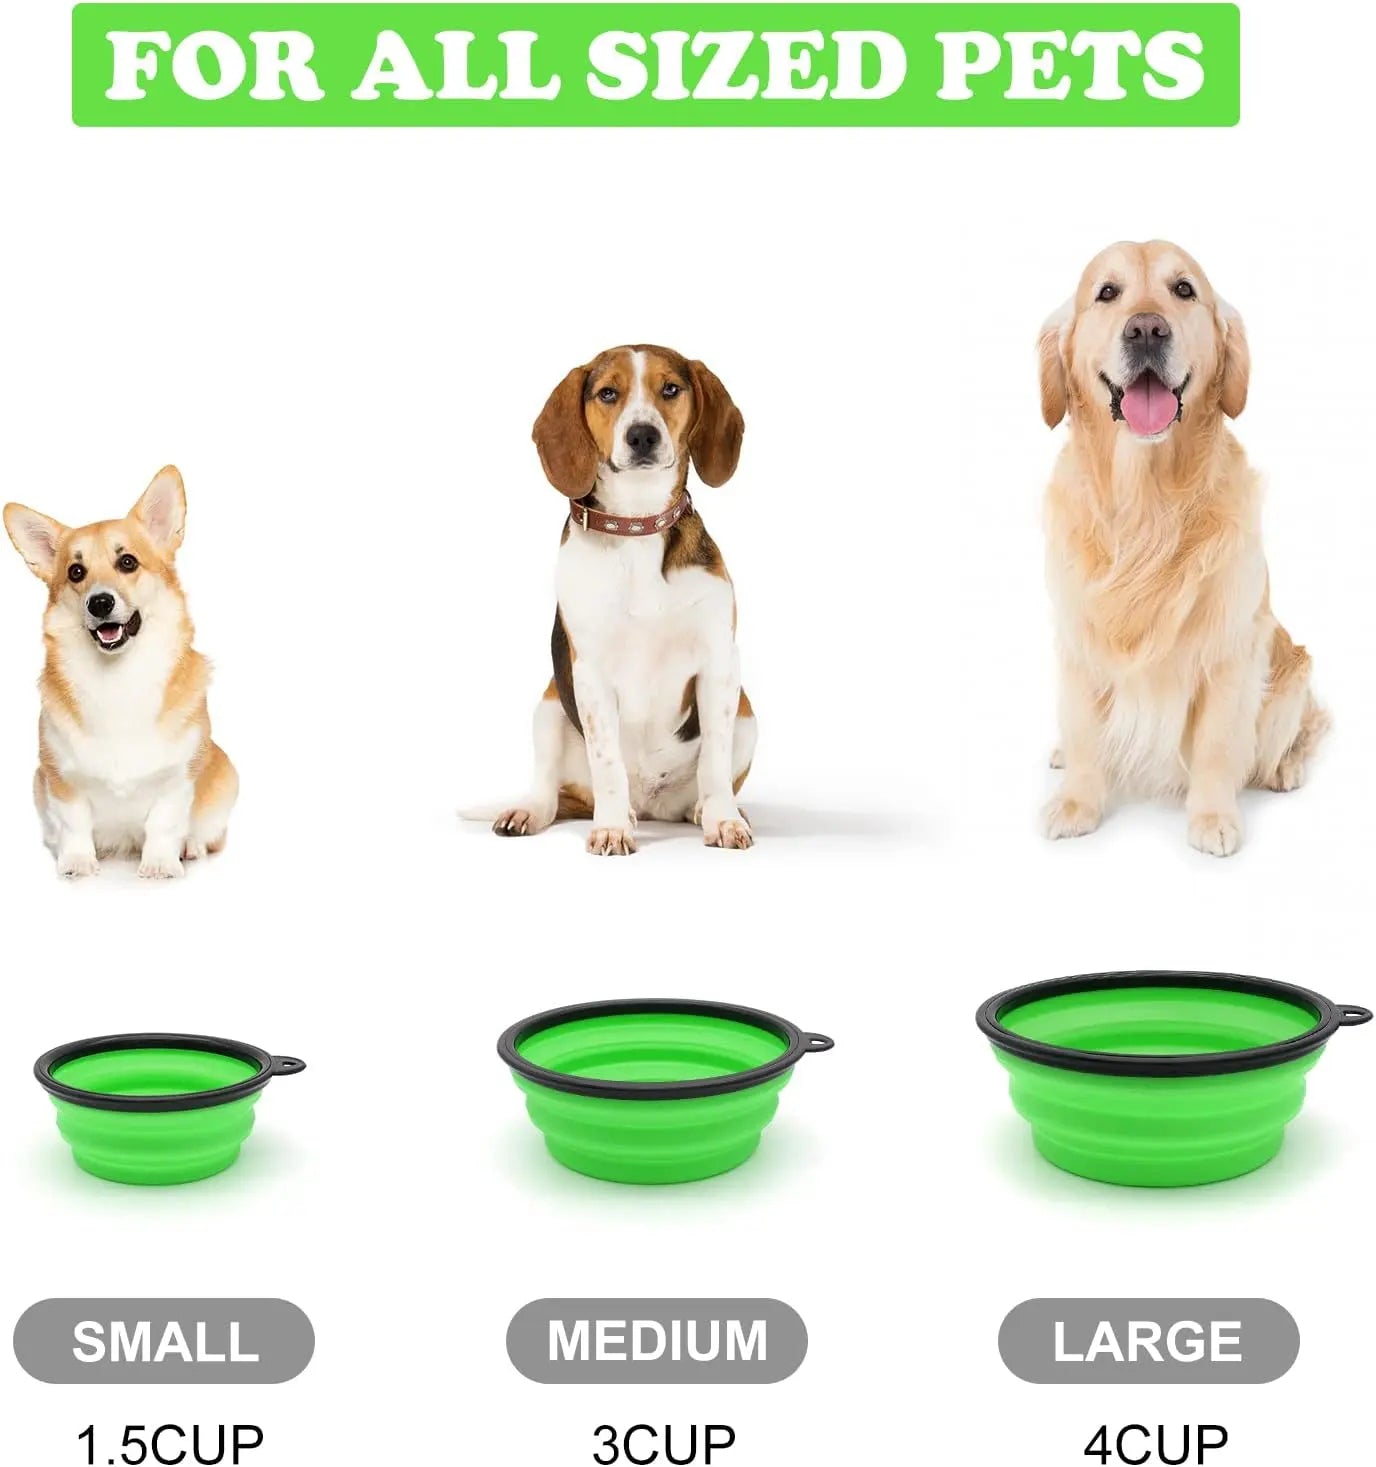 Silicone Collapsible Dog Bowl, Portable Pet Supplies Lightweight Silicone Foldable Pet Food Water Dog Bowl for Traveling Camping